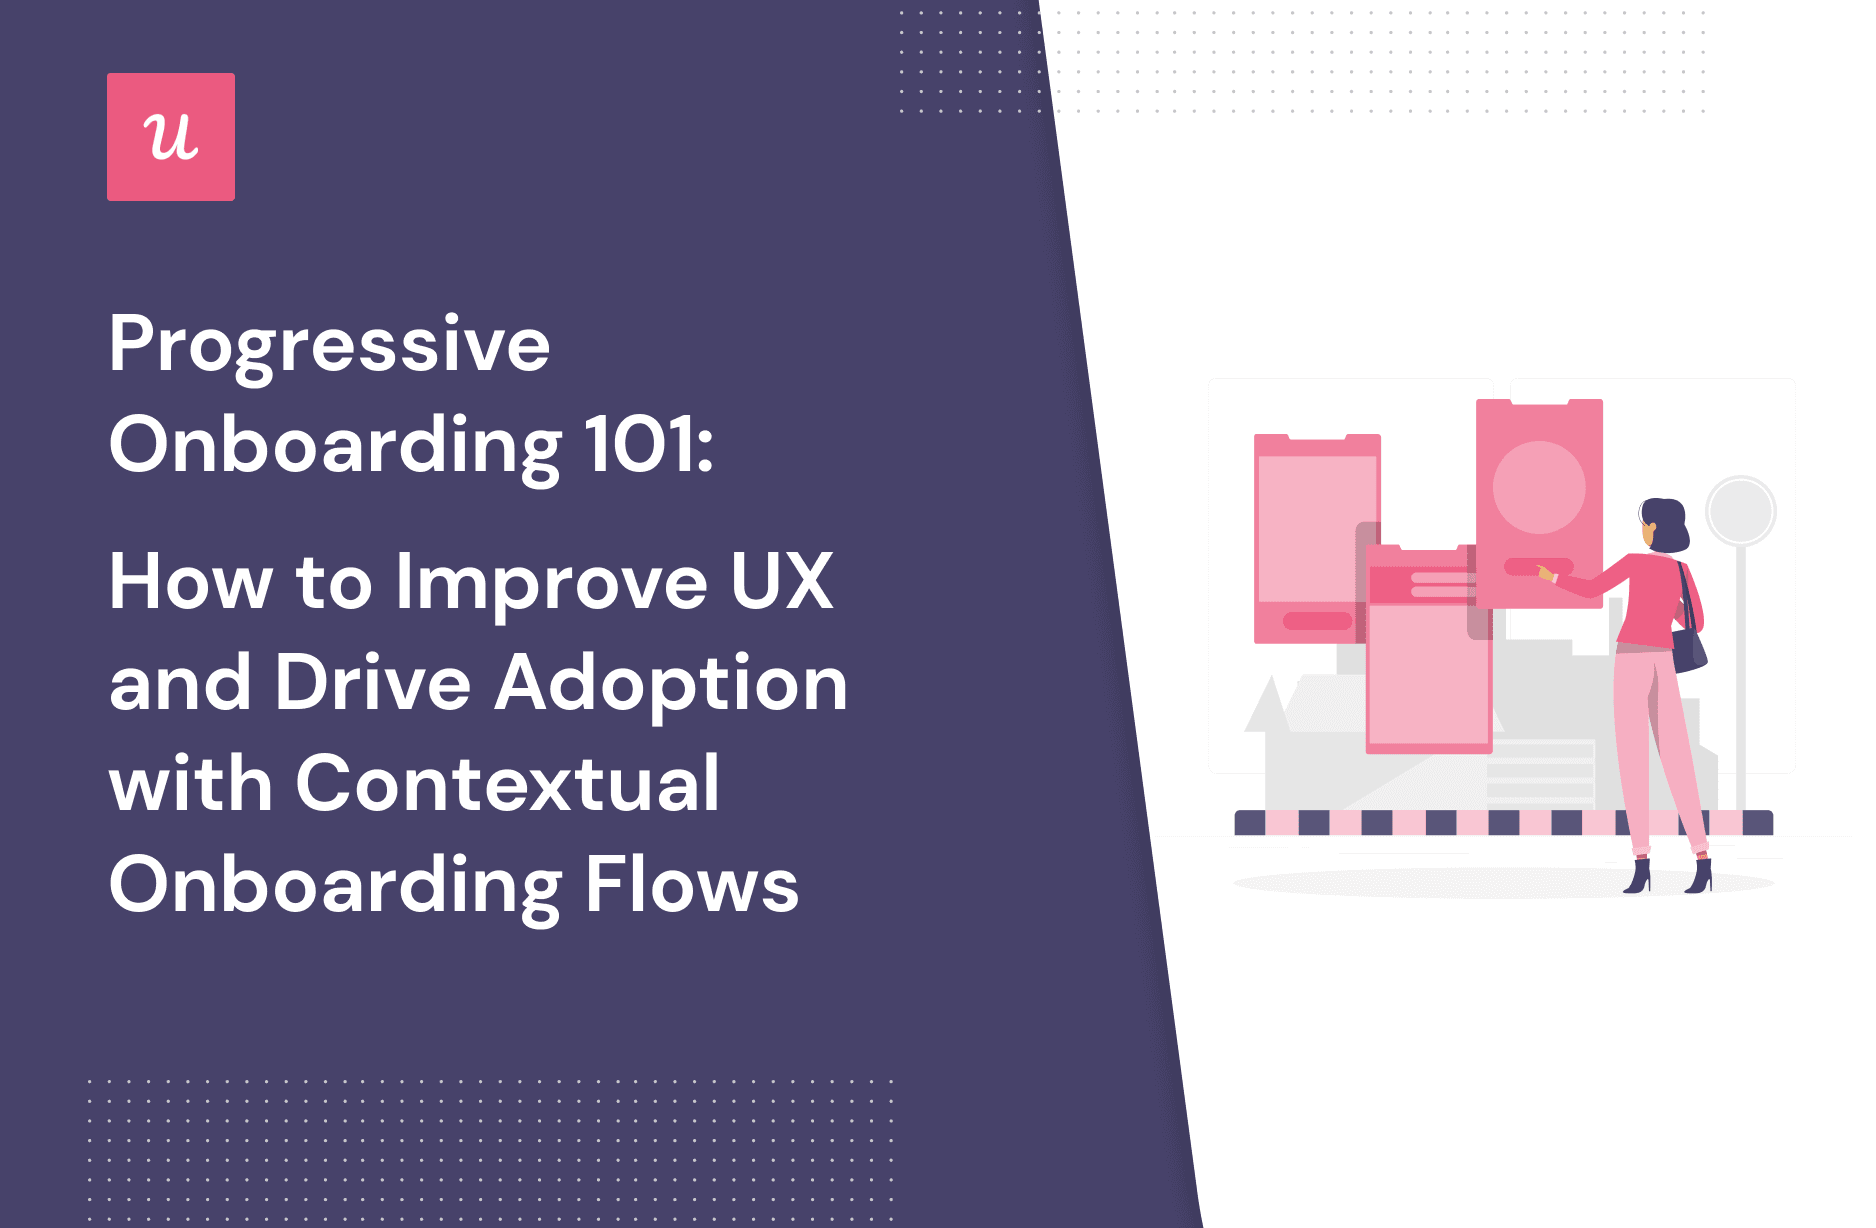 Progressive Onboarding 101: How to Improve UX and Drive Adoption With Contextual Onboarding Flows cover